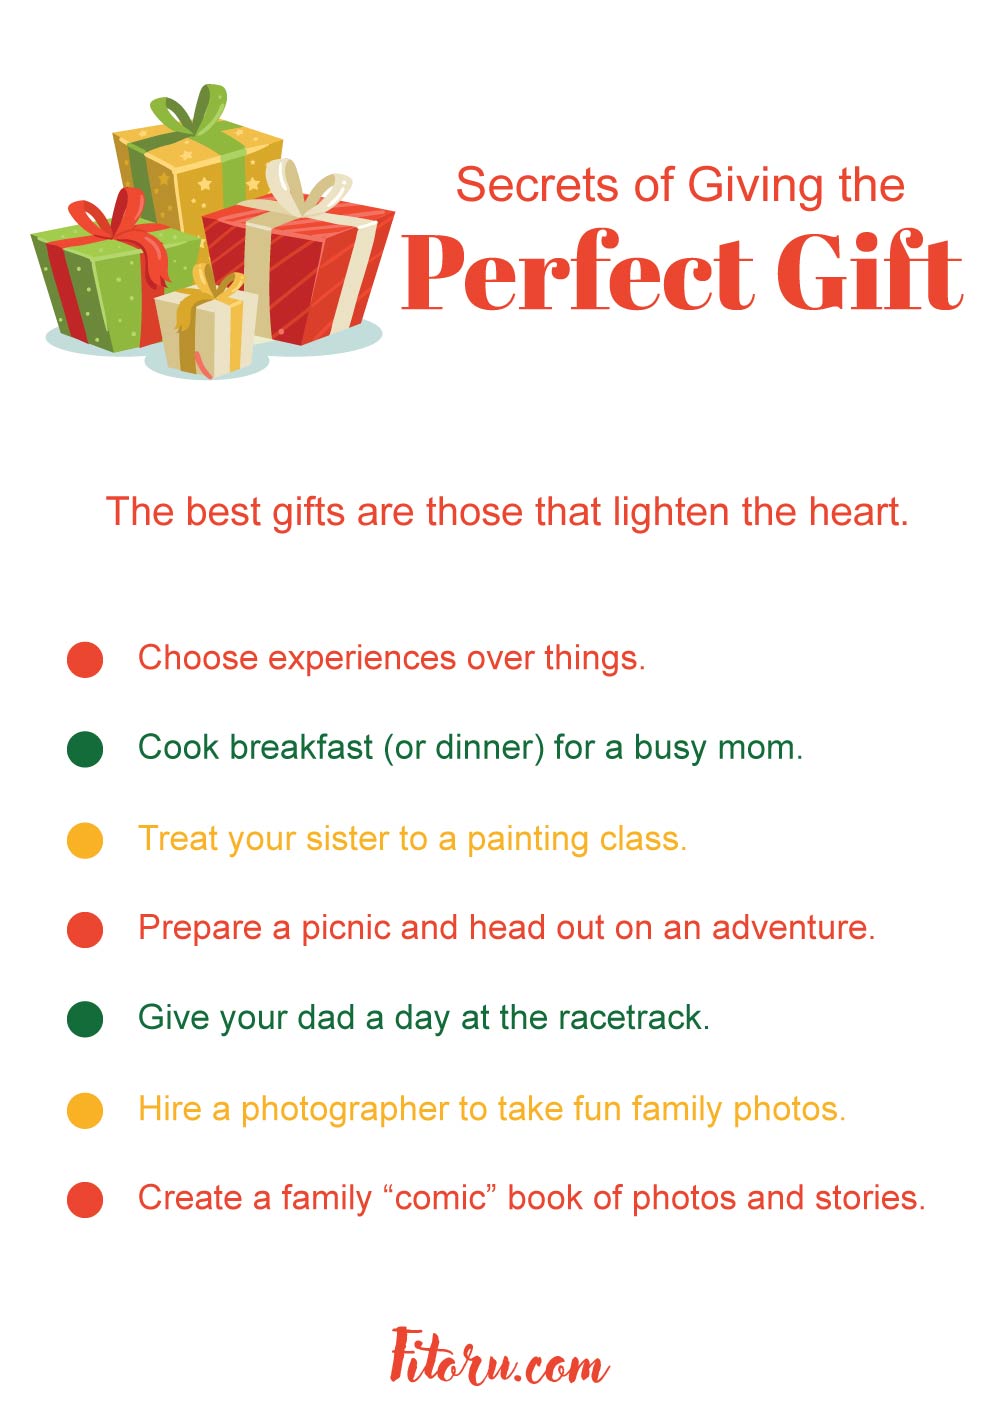 Secrets of Giving the Perfect Gift